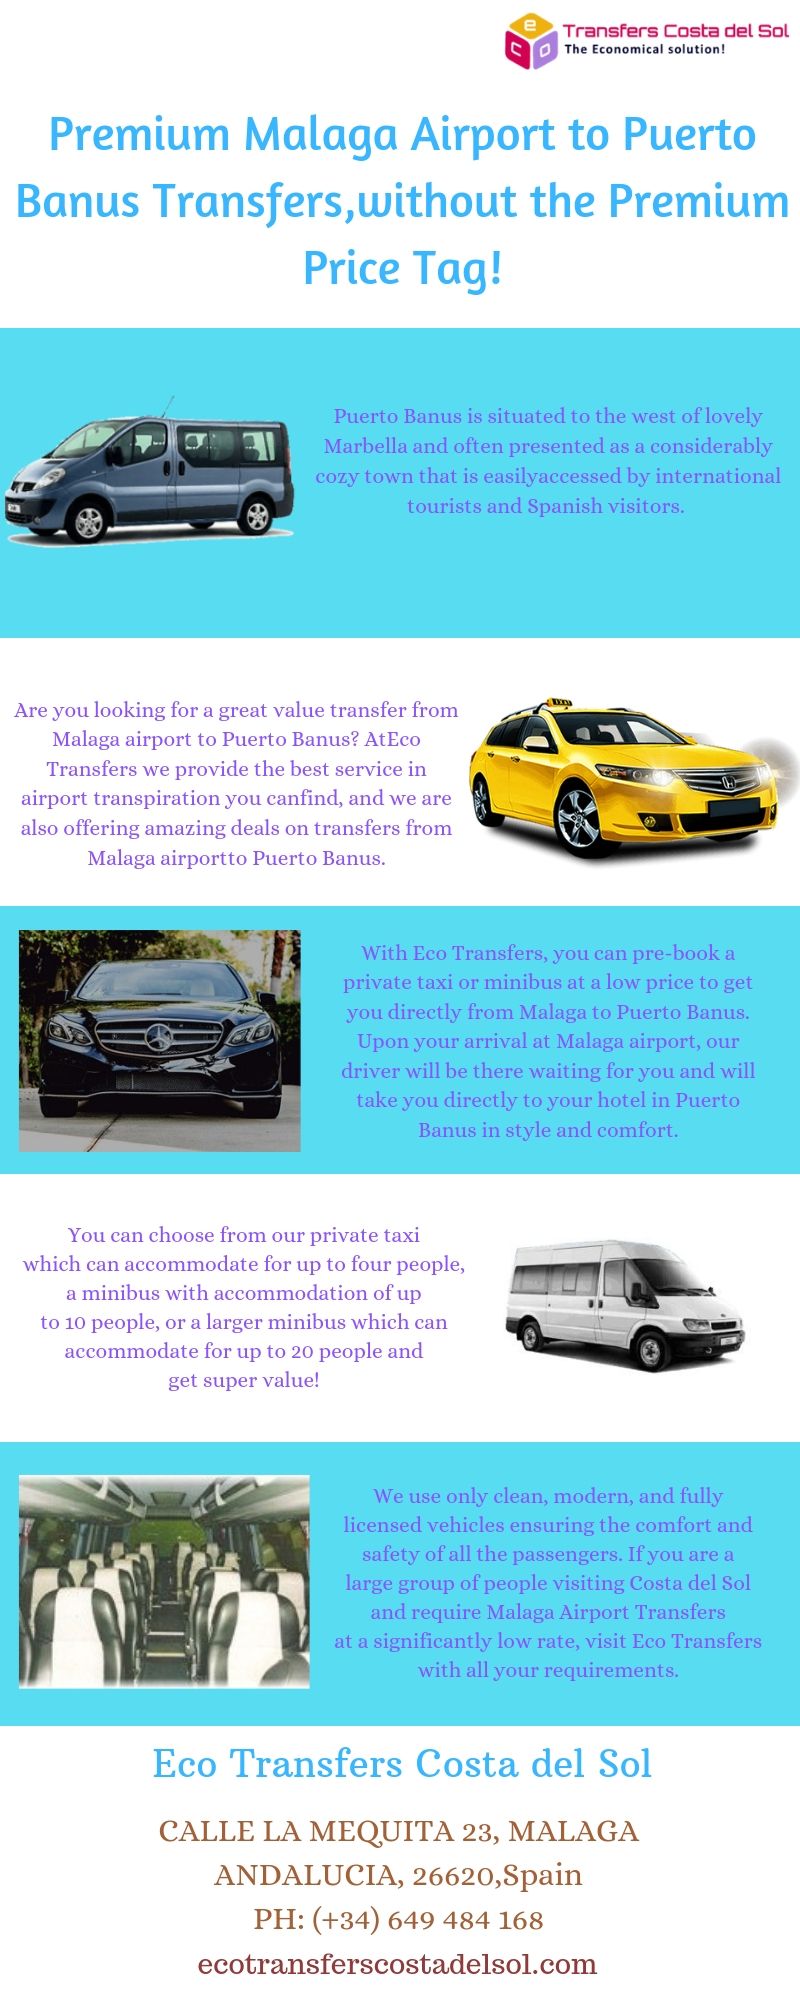 Premium Malaga Airport to Puerto Banus Transfers, without the Premium Price Tag!   At Eco Transfers we provide the best service in airport transpiration you can find, and we are also offering amazing deals on transfers from Malaga airport to Puerto Banus. For more details, visit this link: https://bit.ly/2NogRNk
 by ecotransferscostadelsol